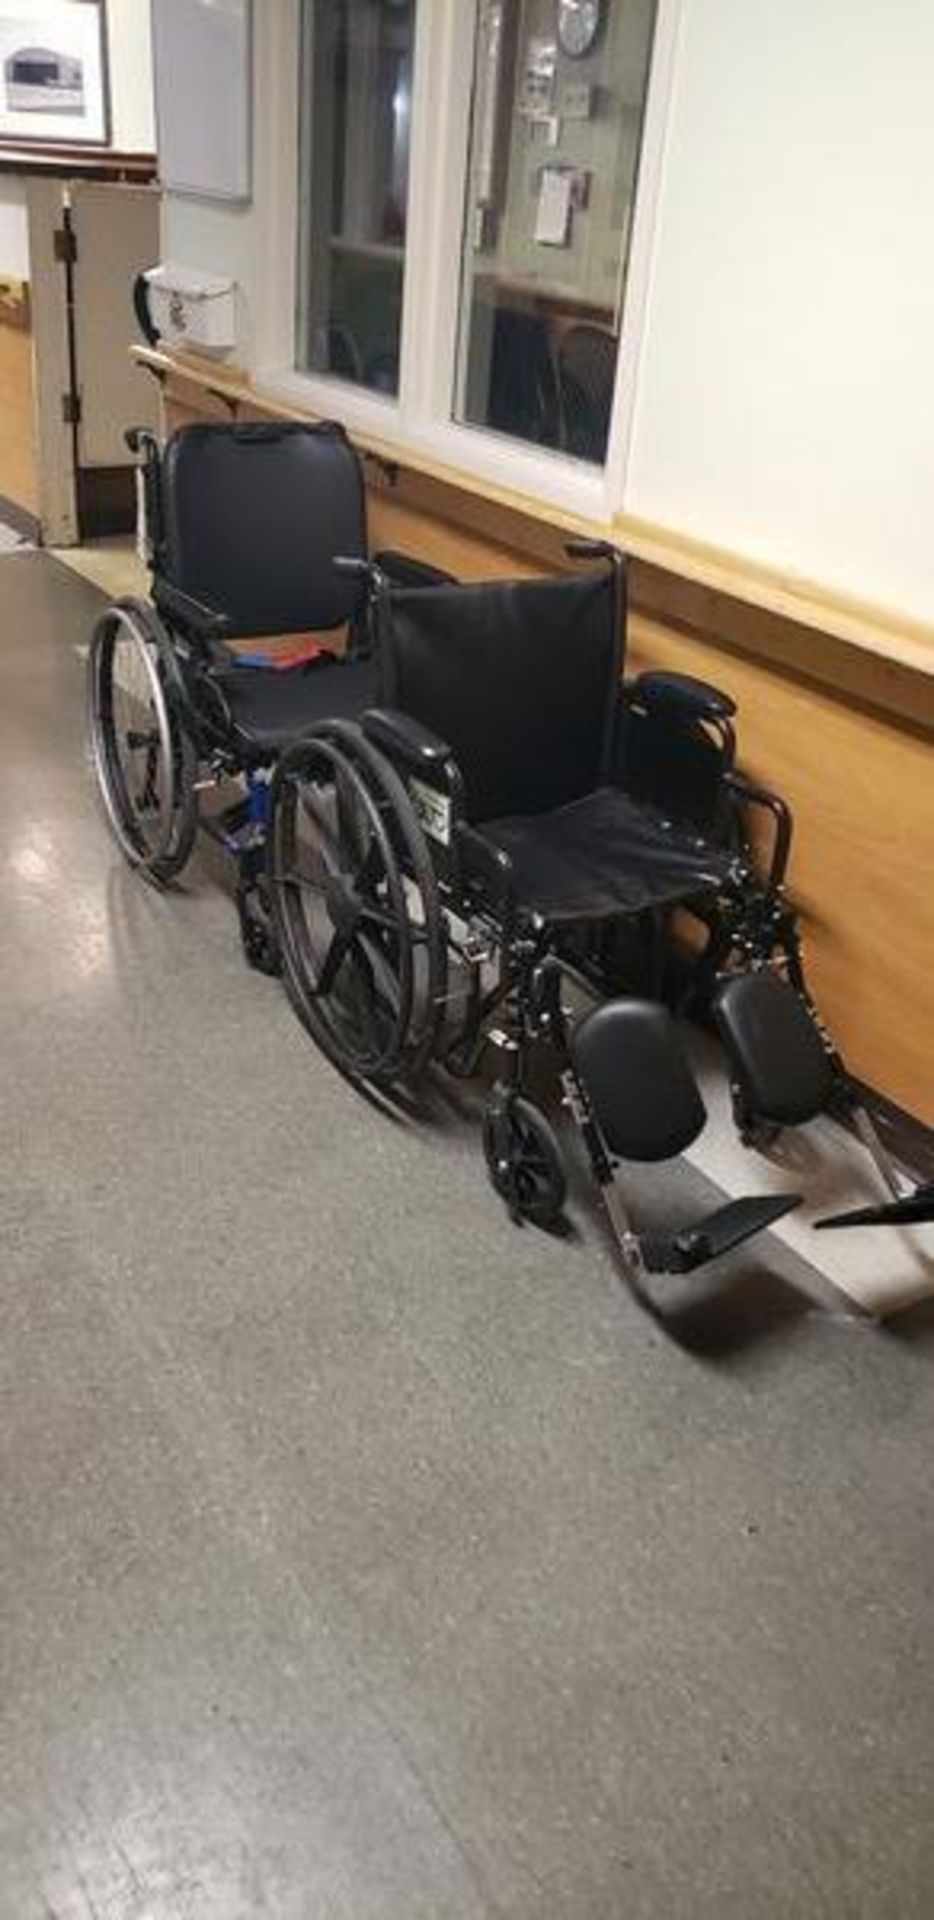 2 ASSORTED WHEEL CHAIRS GX AND K2 LITE - Image 2 of 7